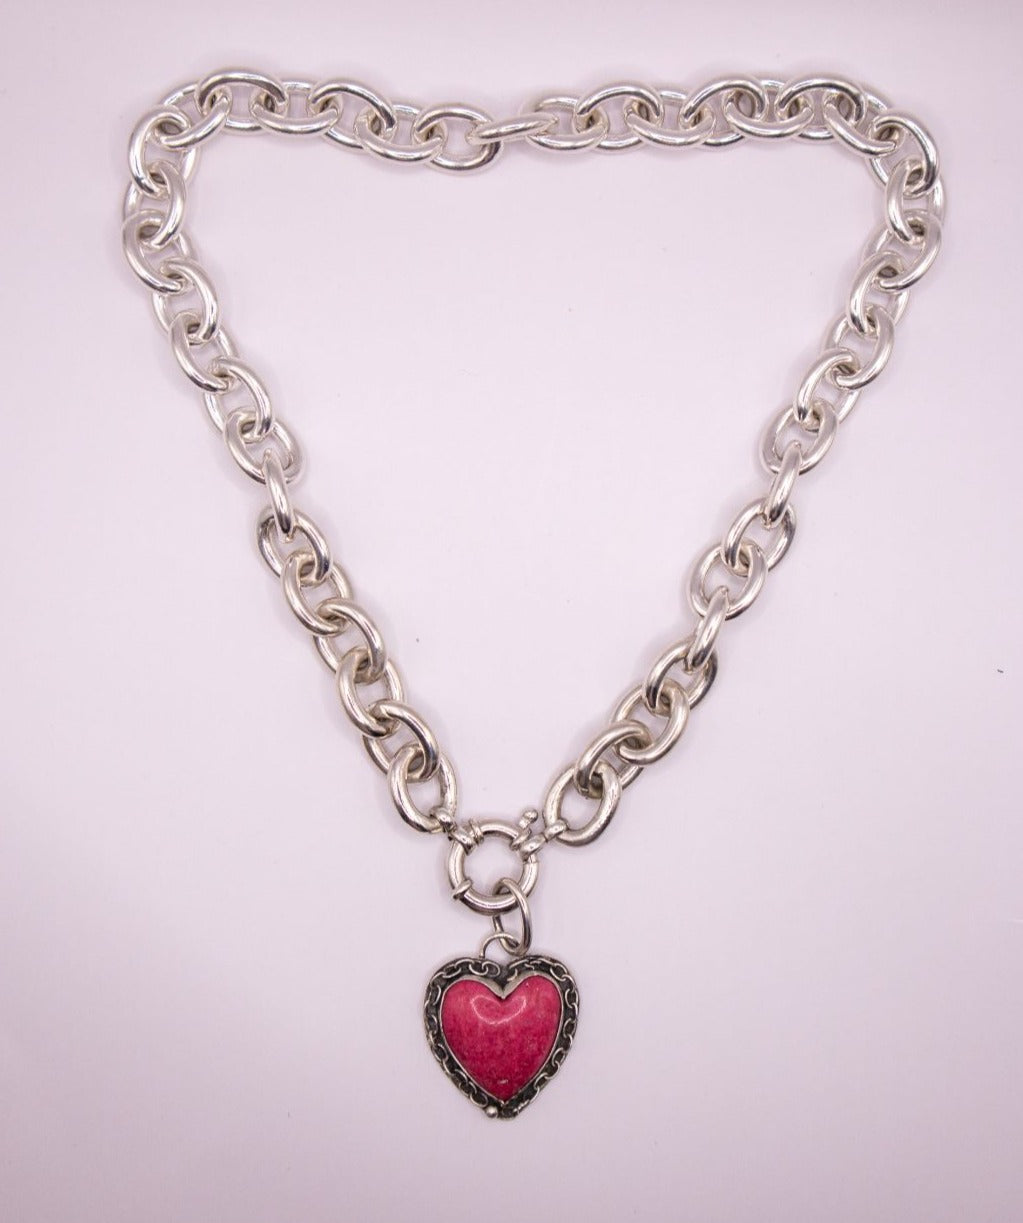 Chains of Love Necklace